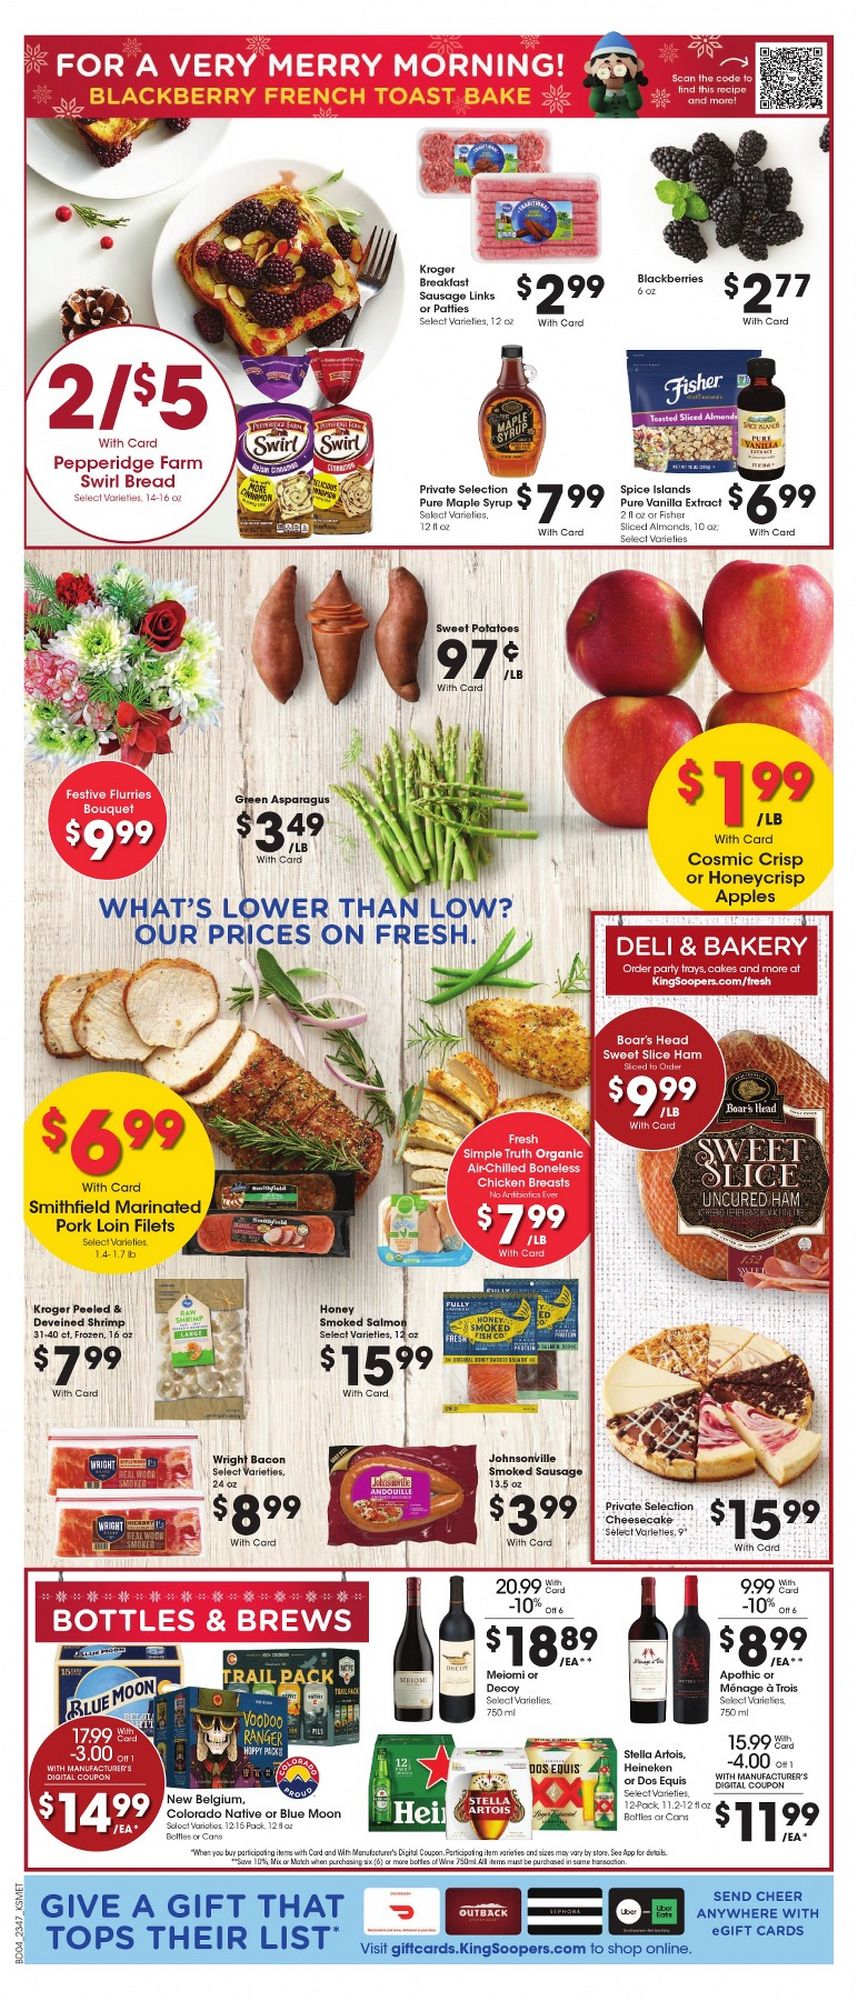 King Soopers Christmas July 2024 Weekly Sales, Deals, Discounts and Digital Coupons.